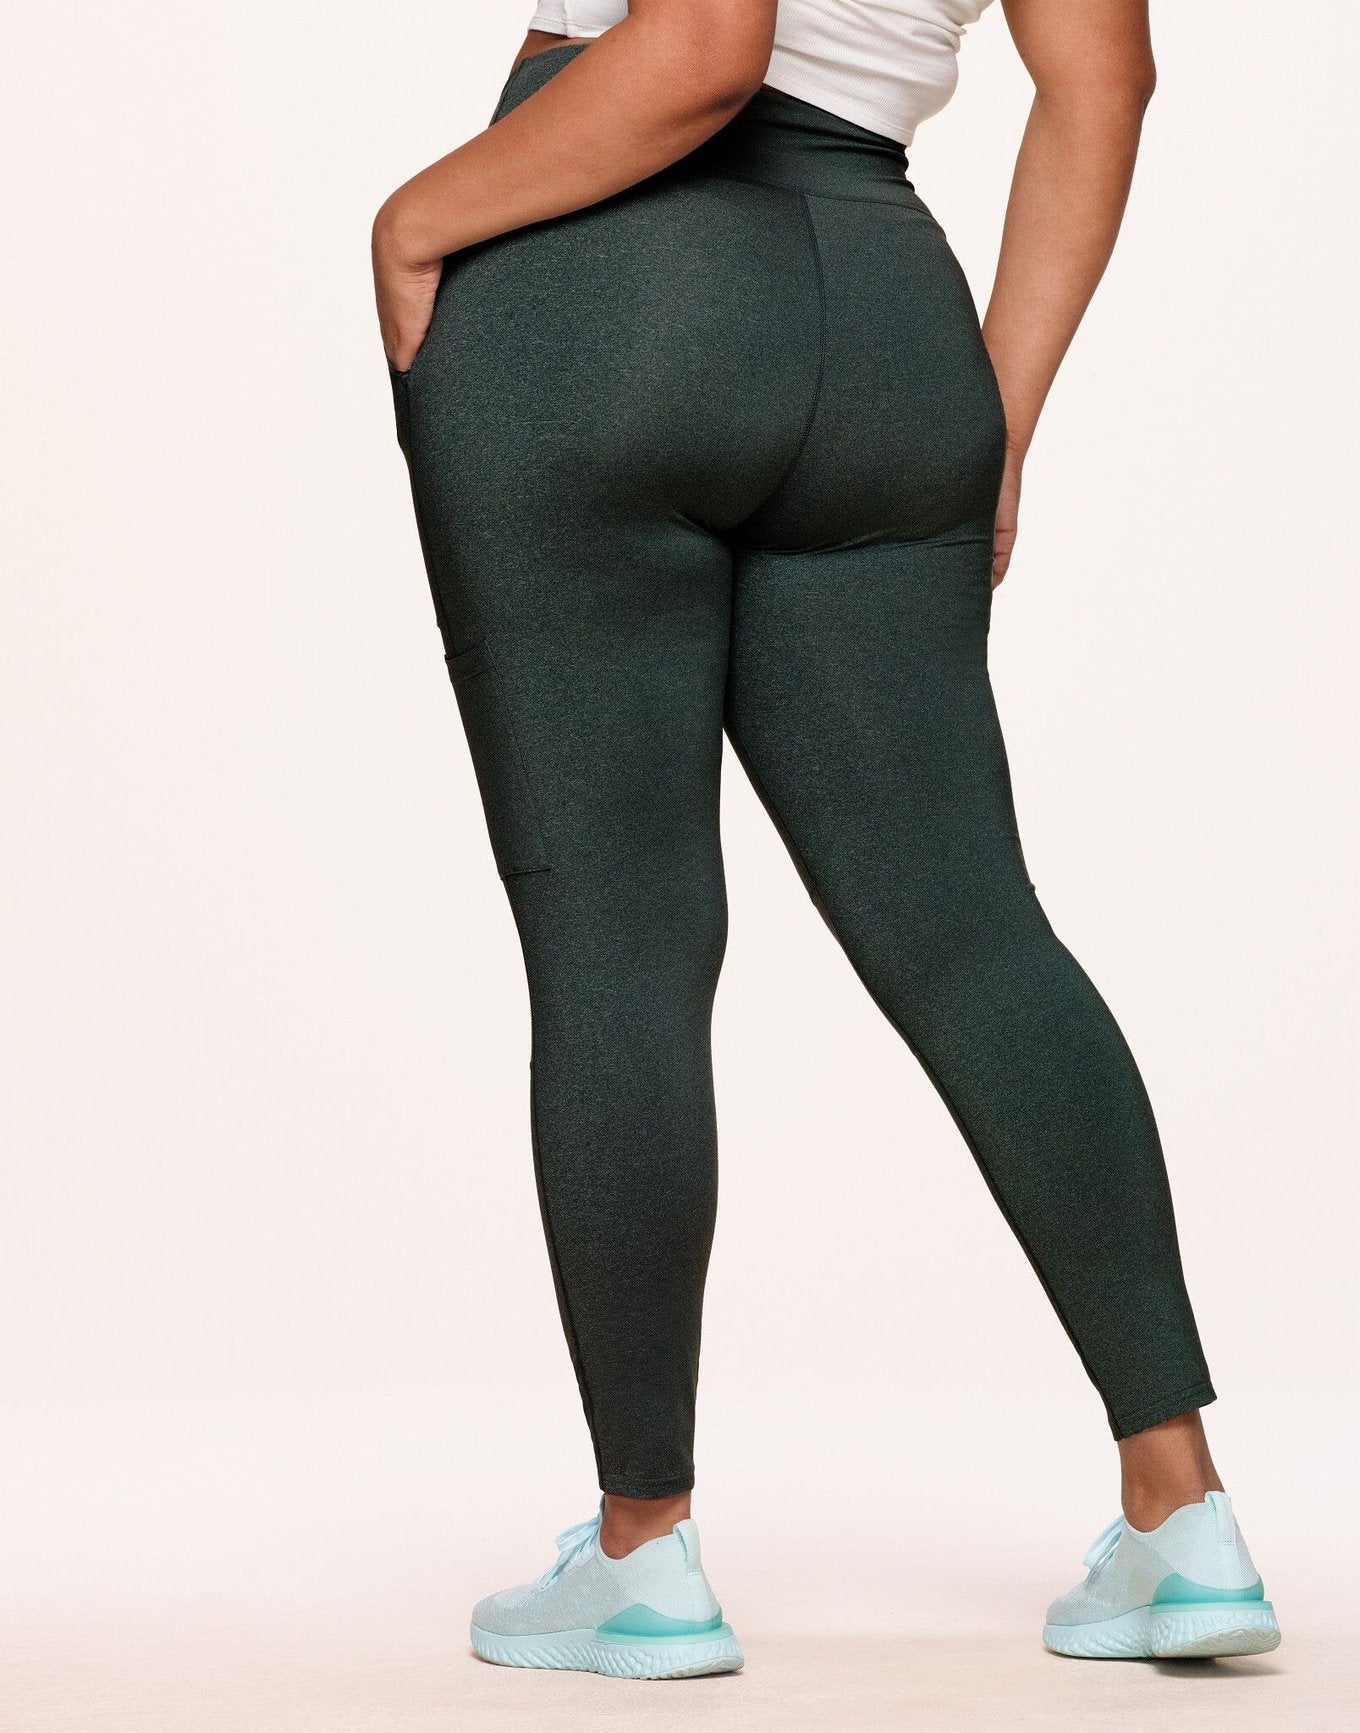 Walkpop Haley Heathered Cargo Legging Compression Active Legging with Multi Pocket Detail in color Cypress Heather and shape legging